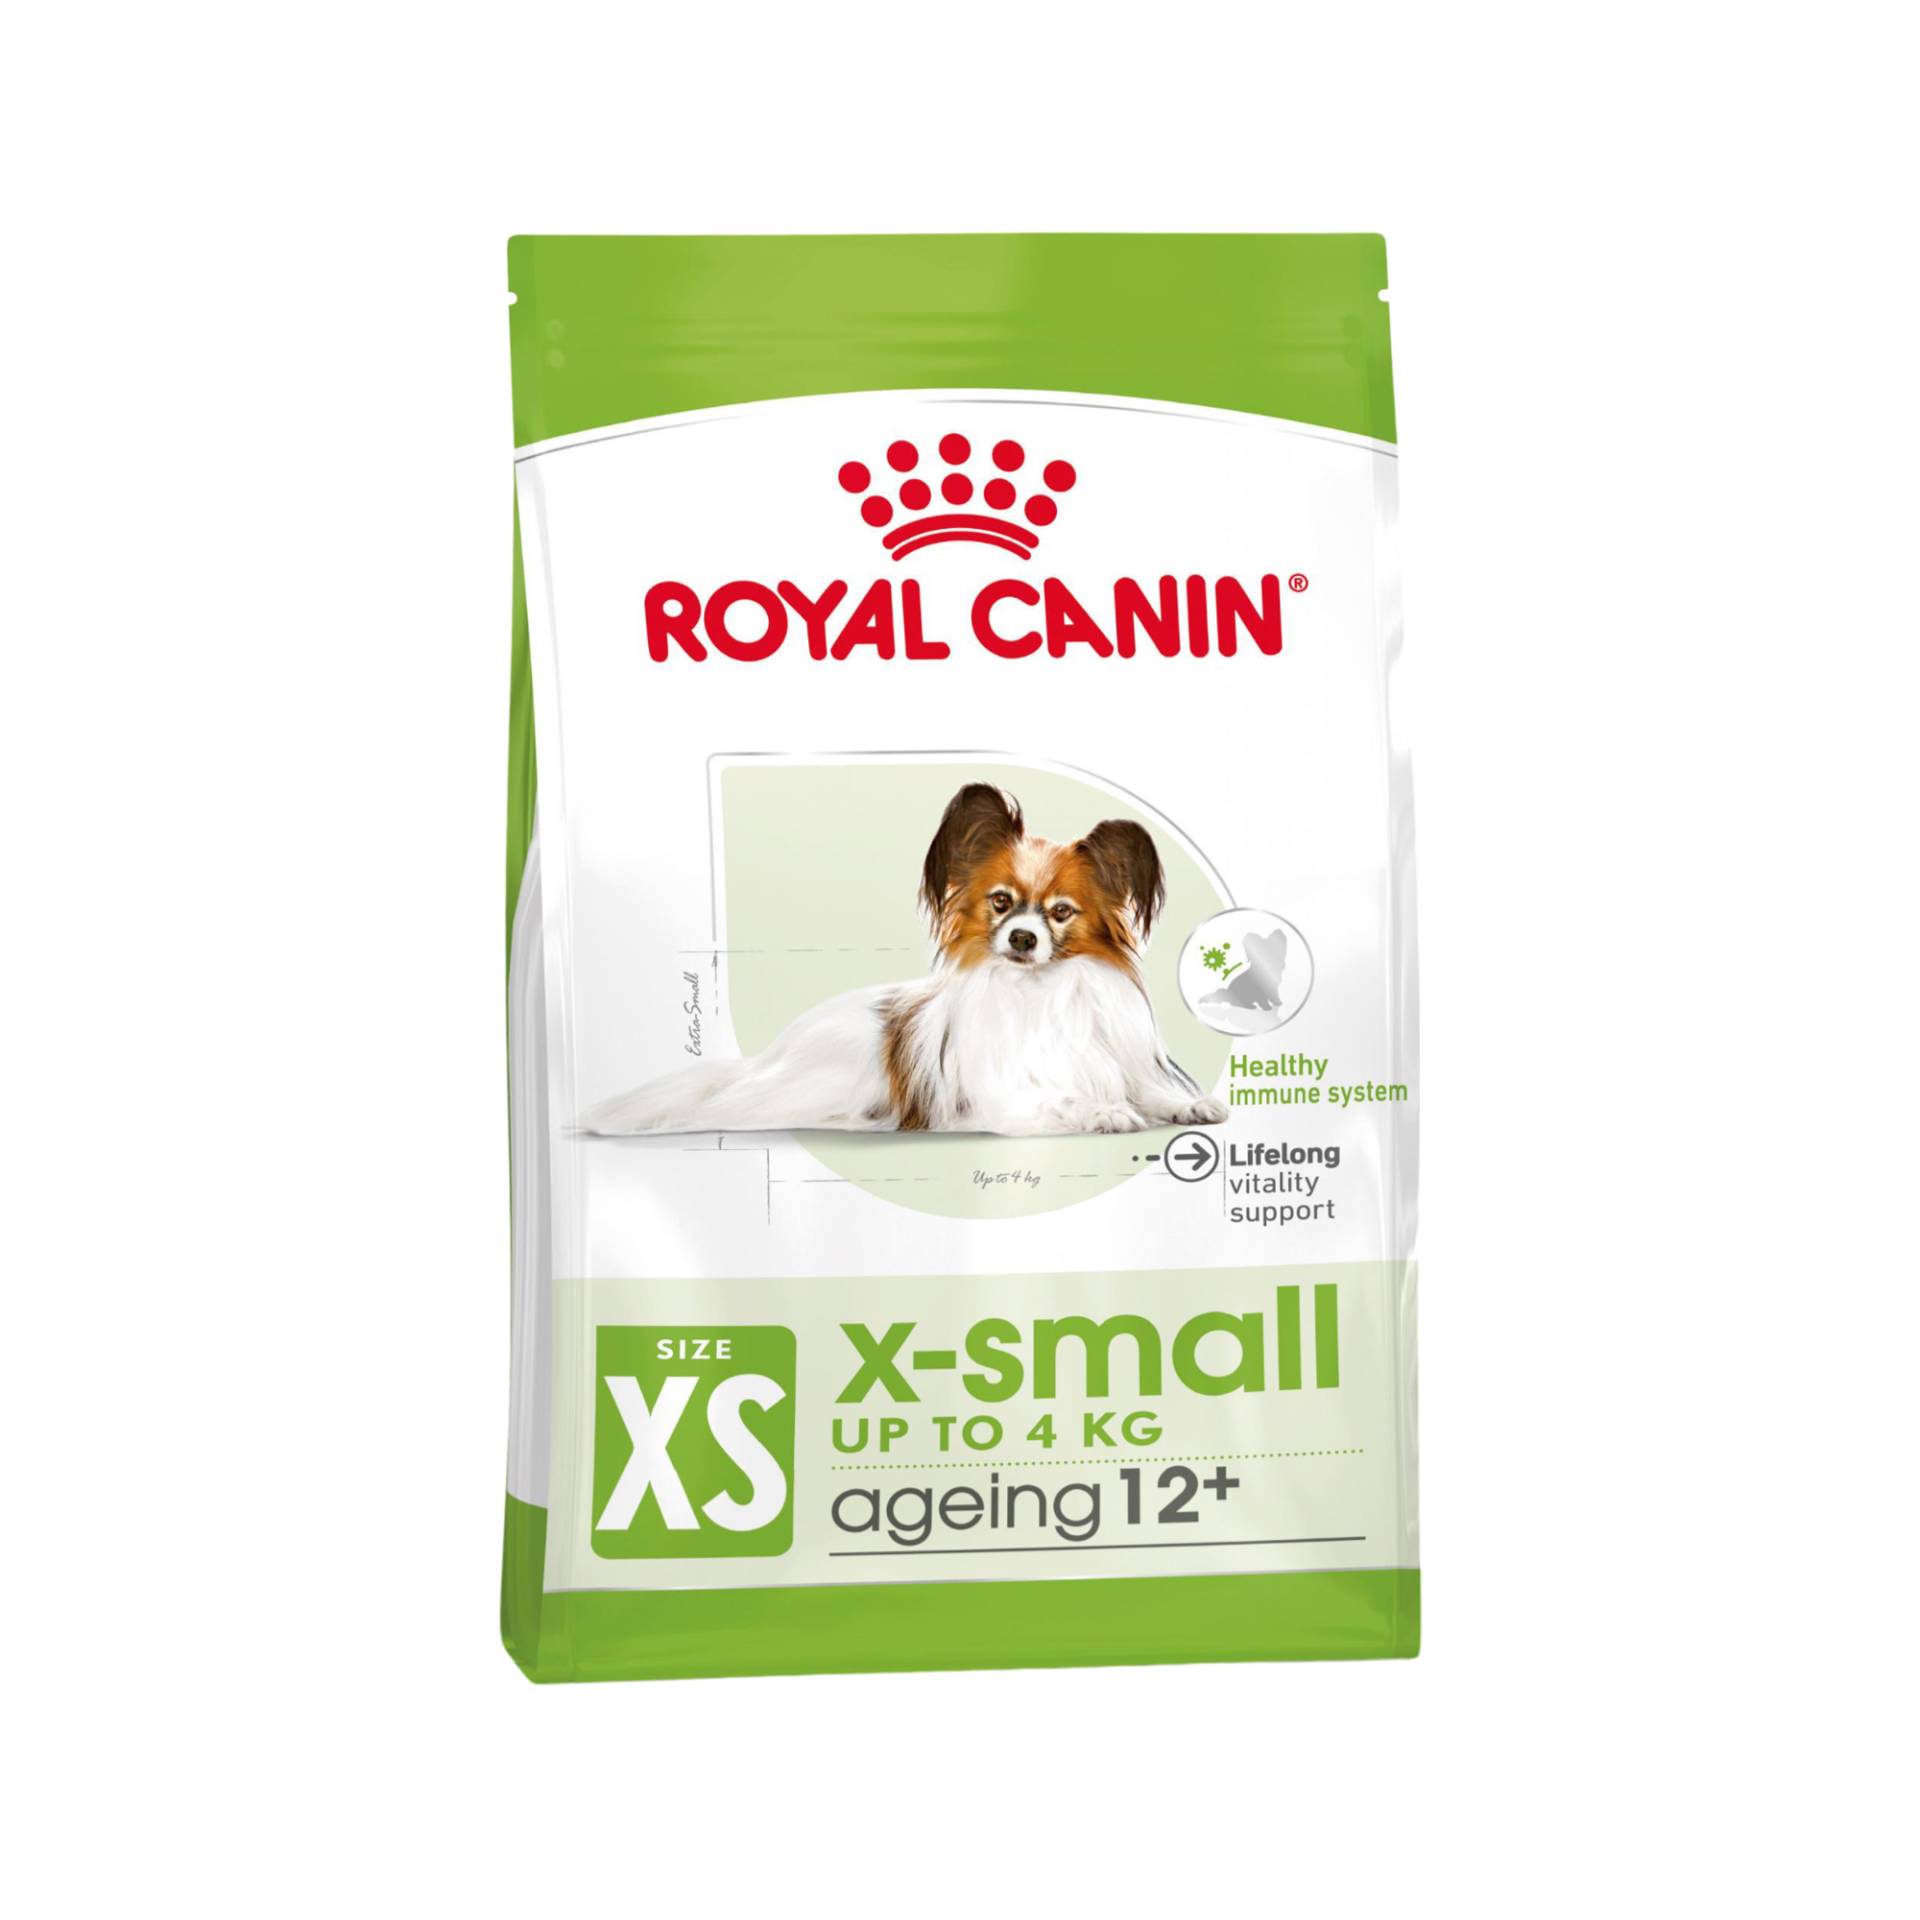 Royal Canin X-Small Ageing 12+ Hundefutter - 500 g von Royal Canin